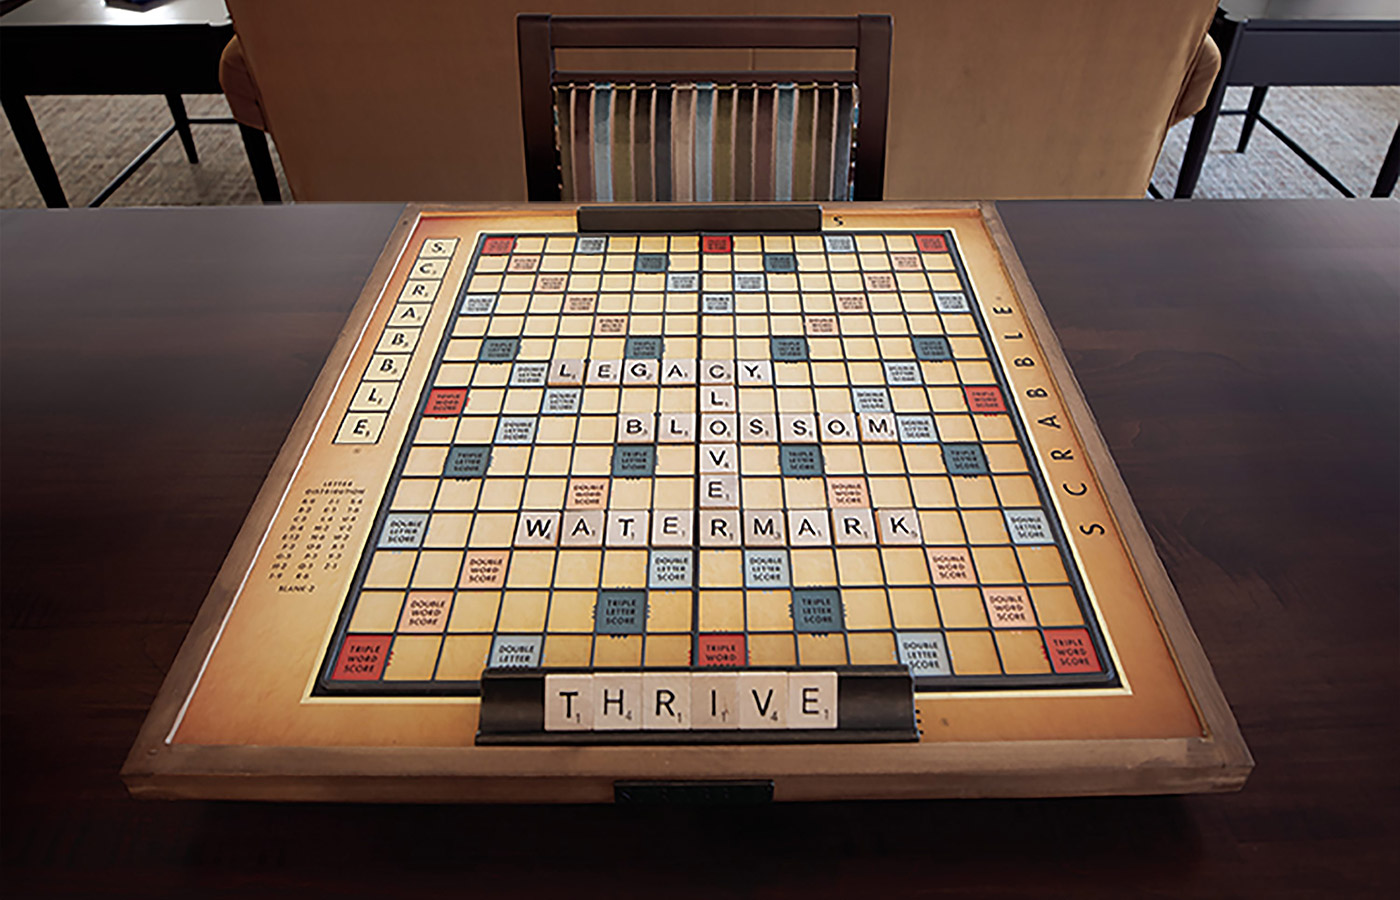 Game of scrabble.